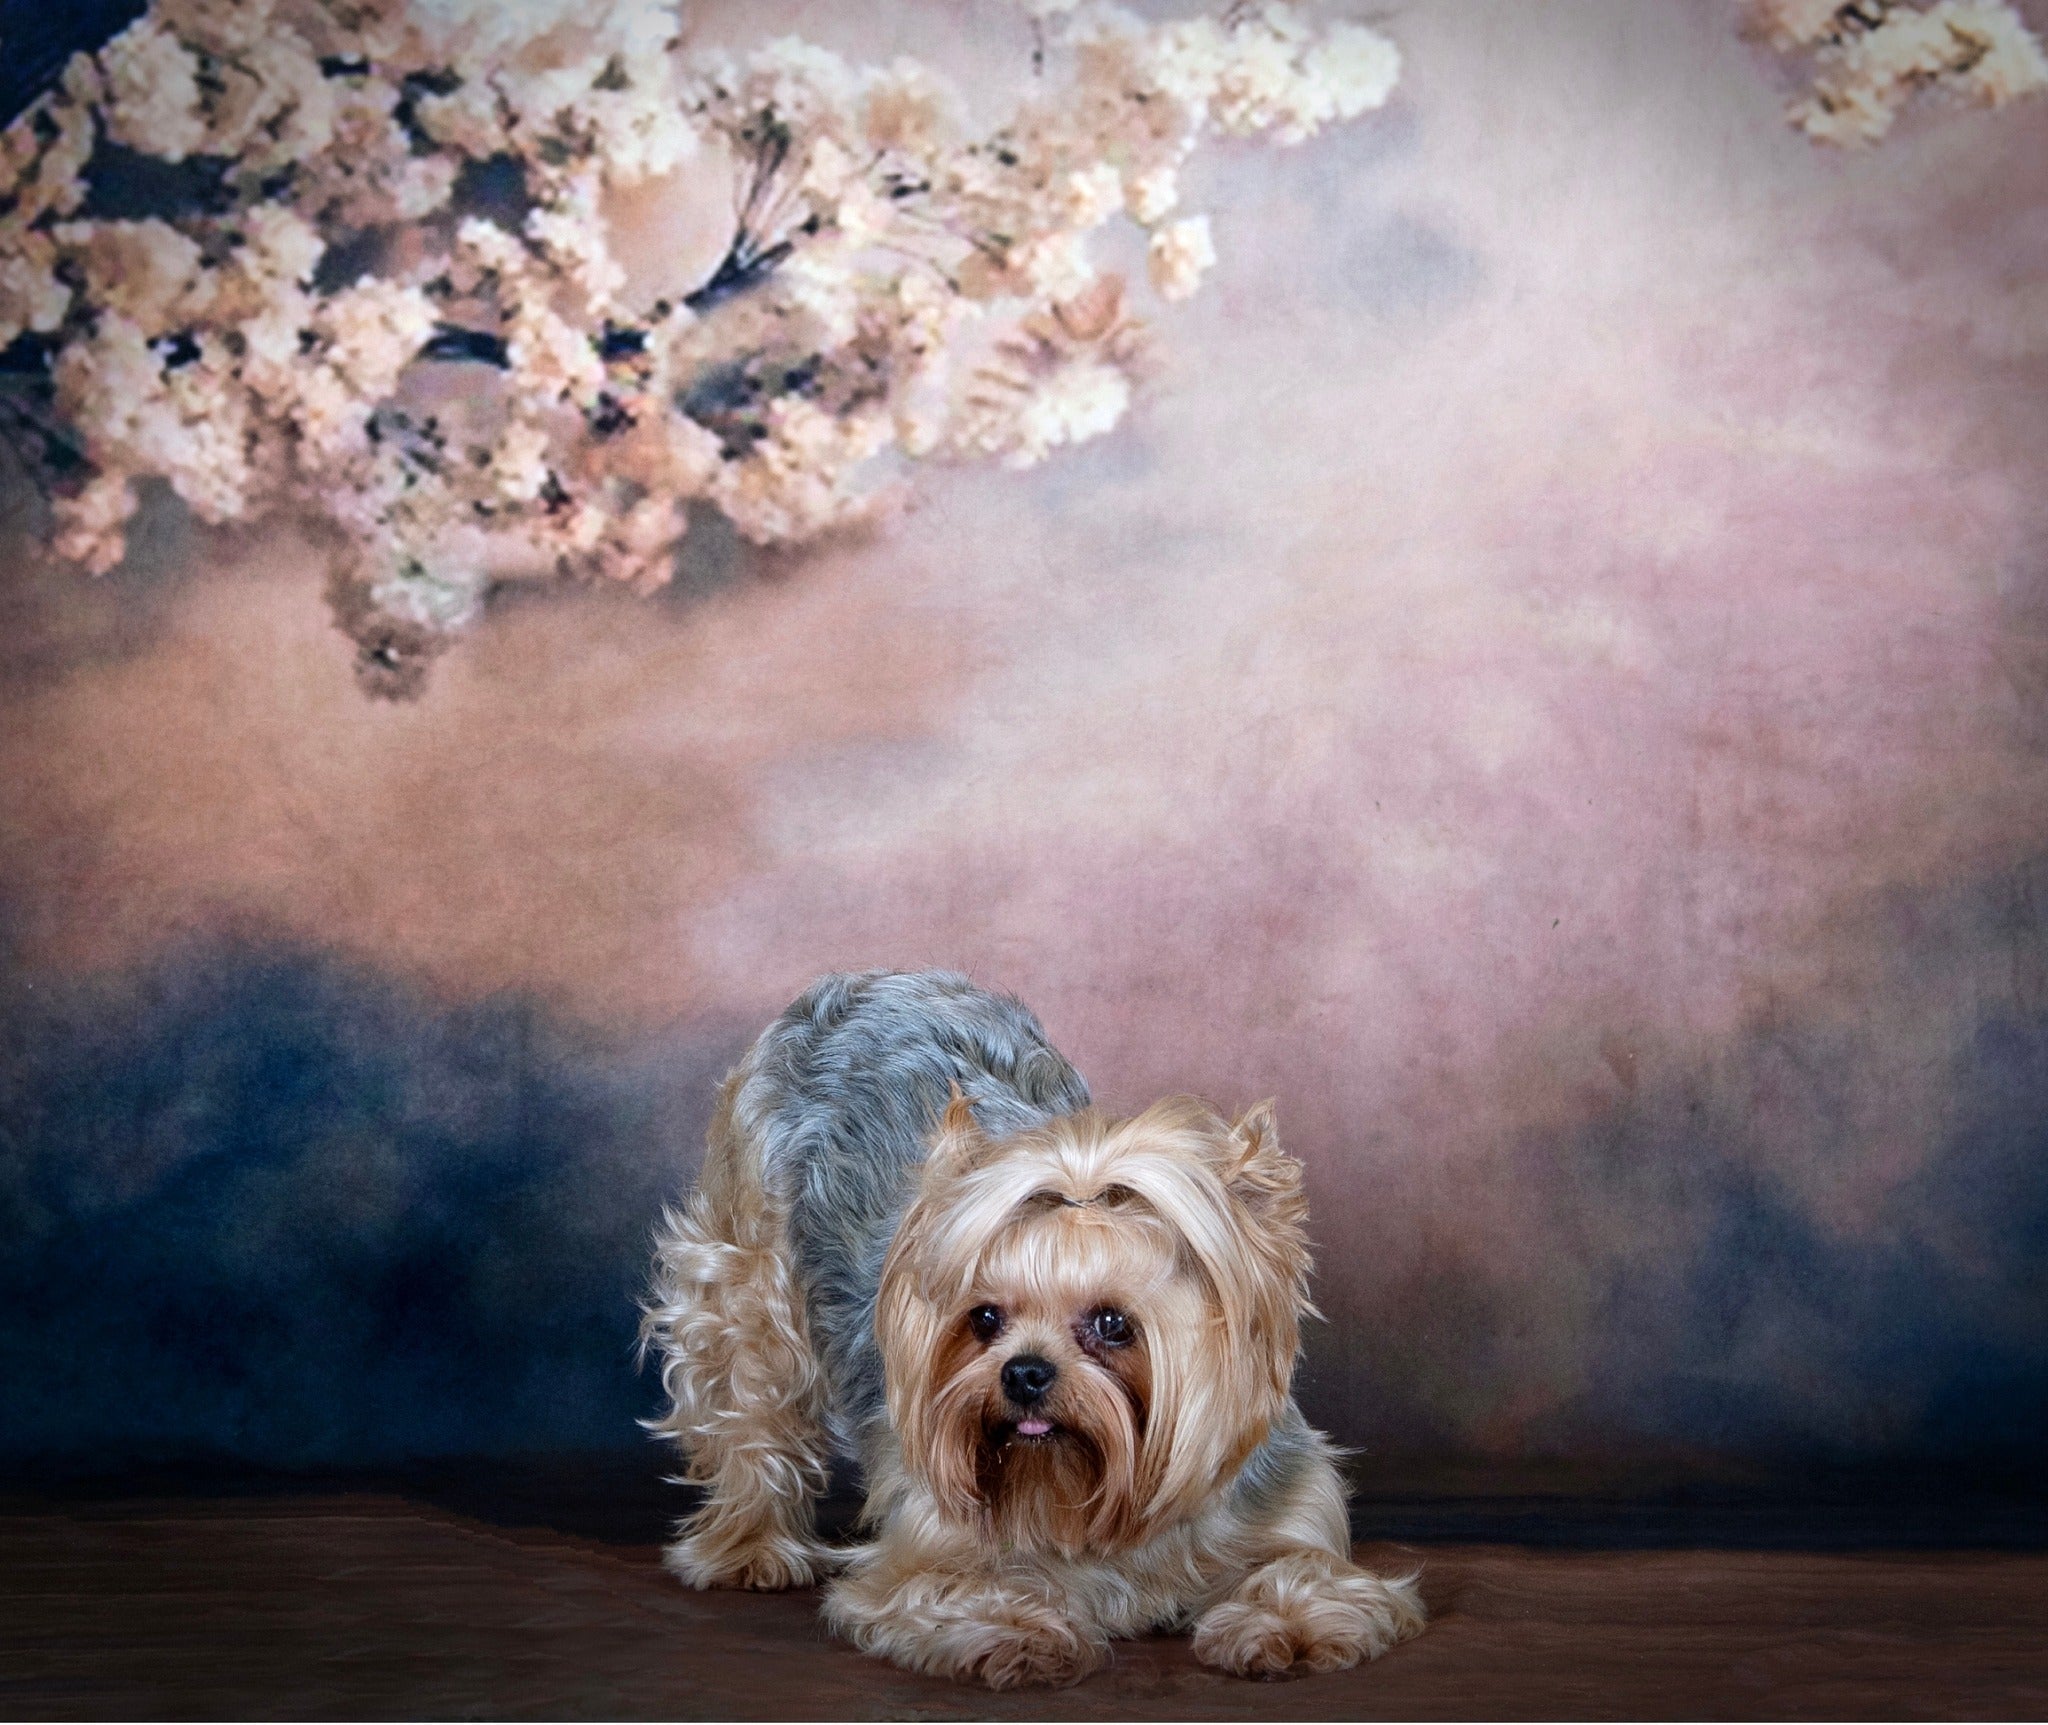 Kate Pet Abstract Background With Florals Backdrops for Photography